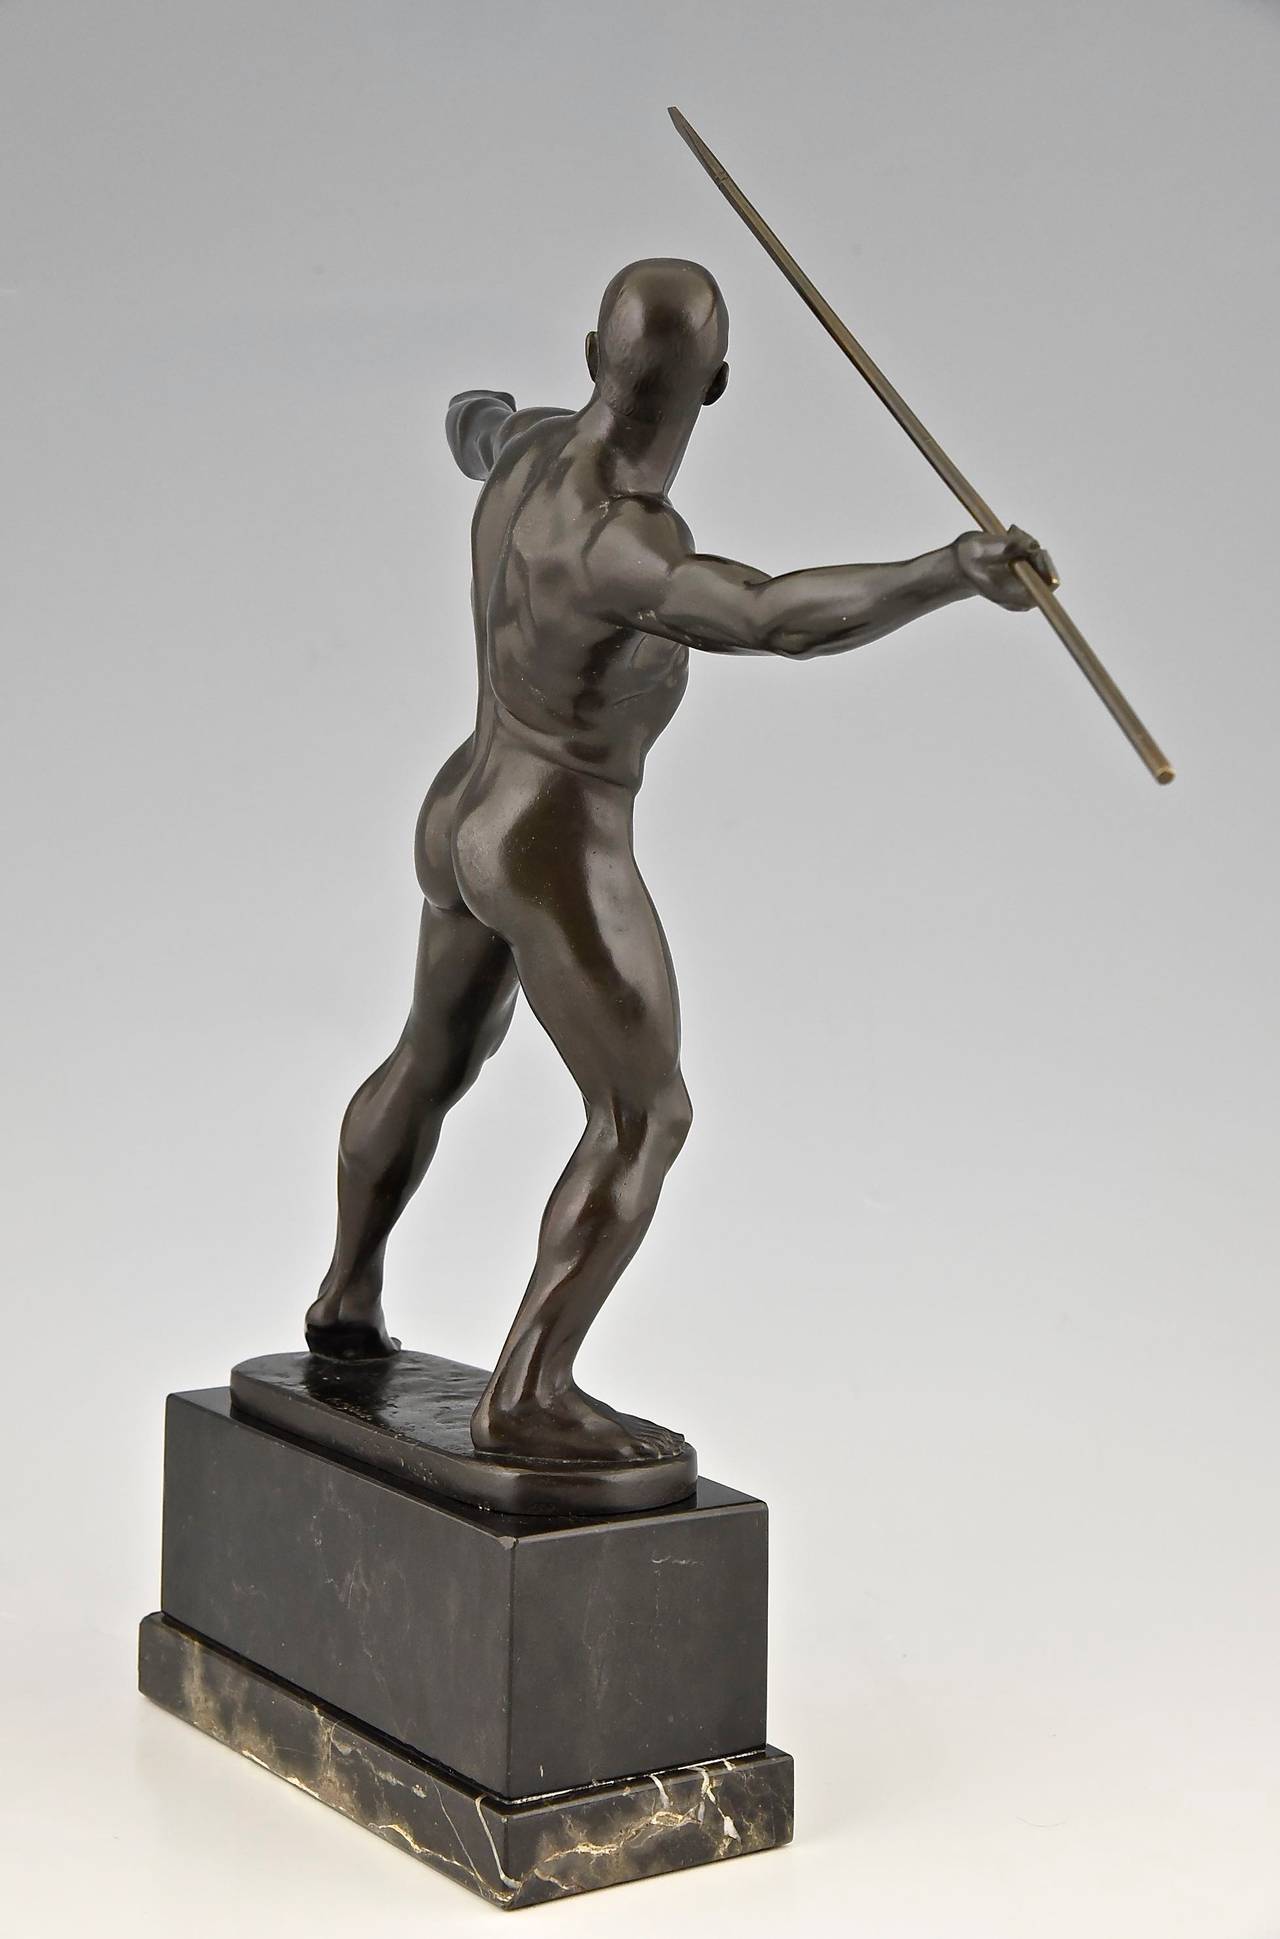 Patinated Art Deco Bronze Sculpture of Male Nude by Karl Mobius, Germany, 1921